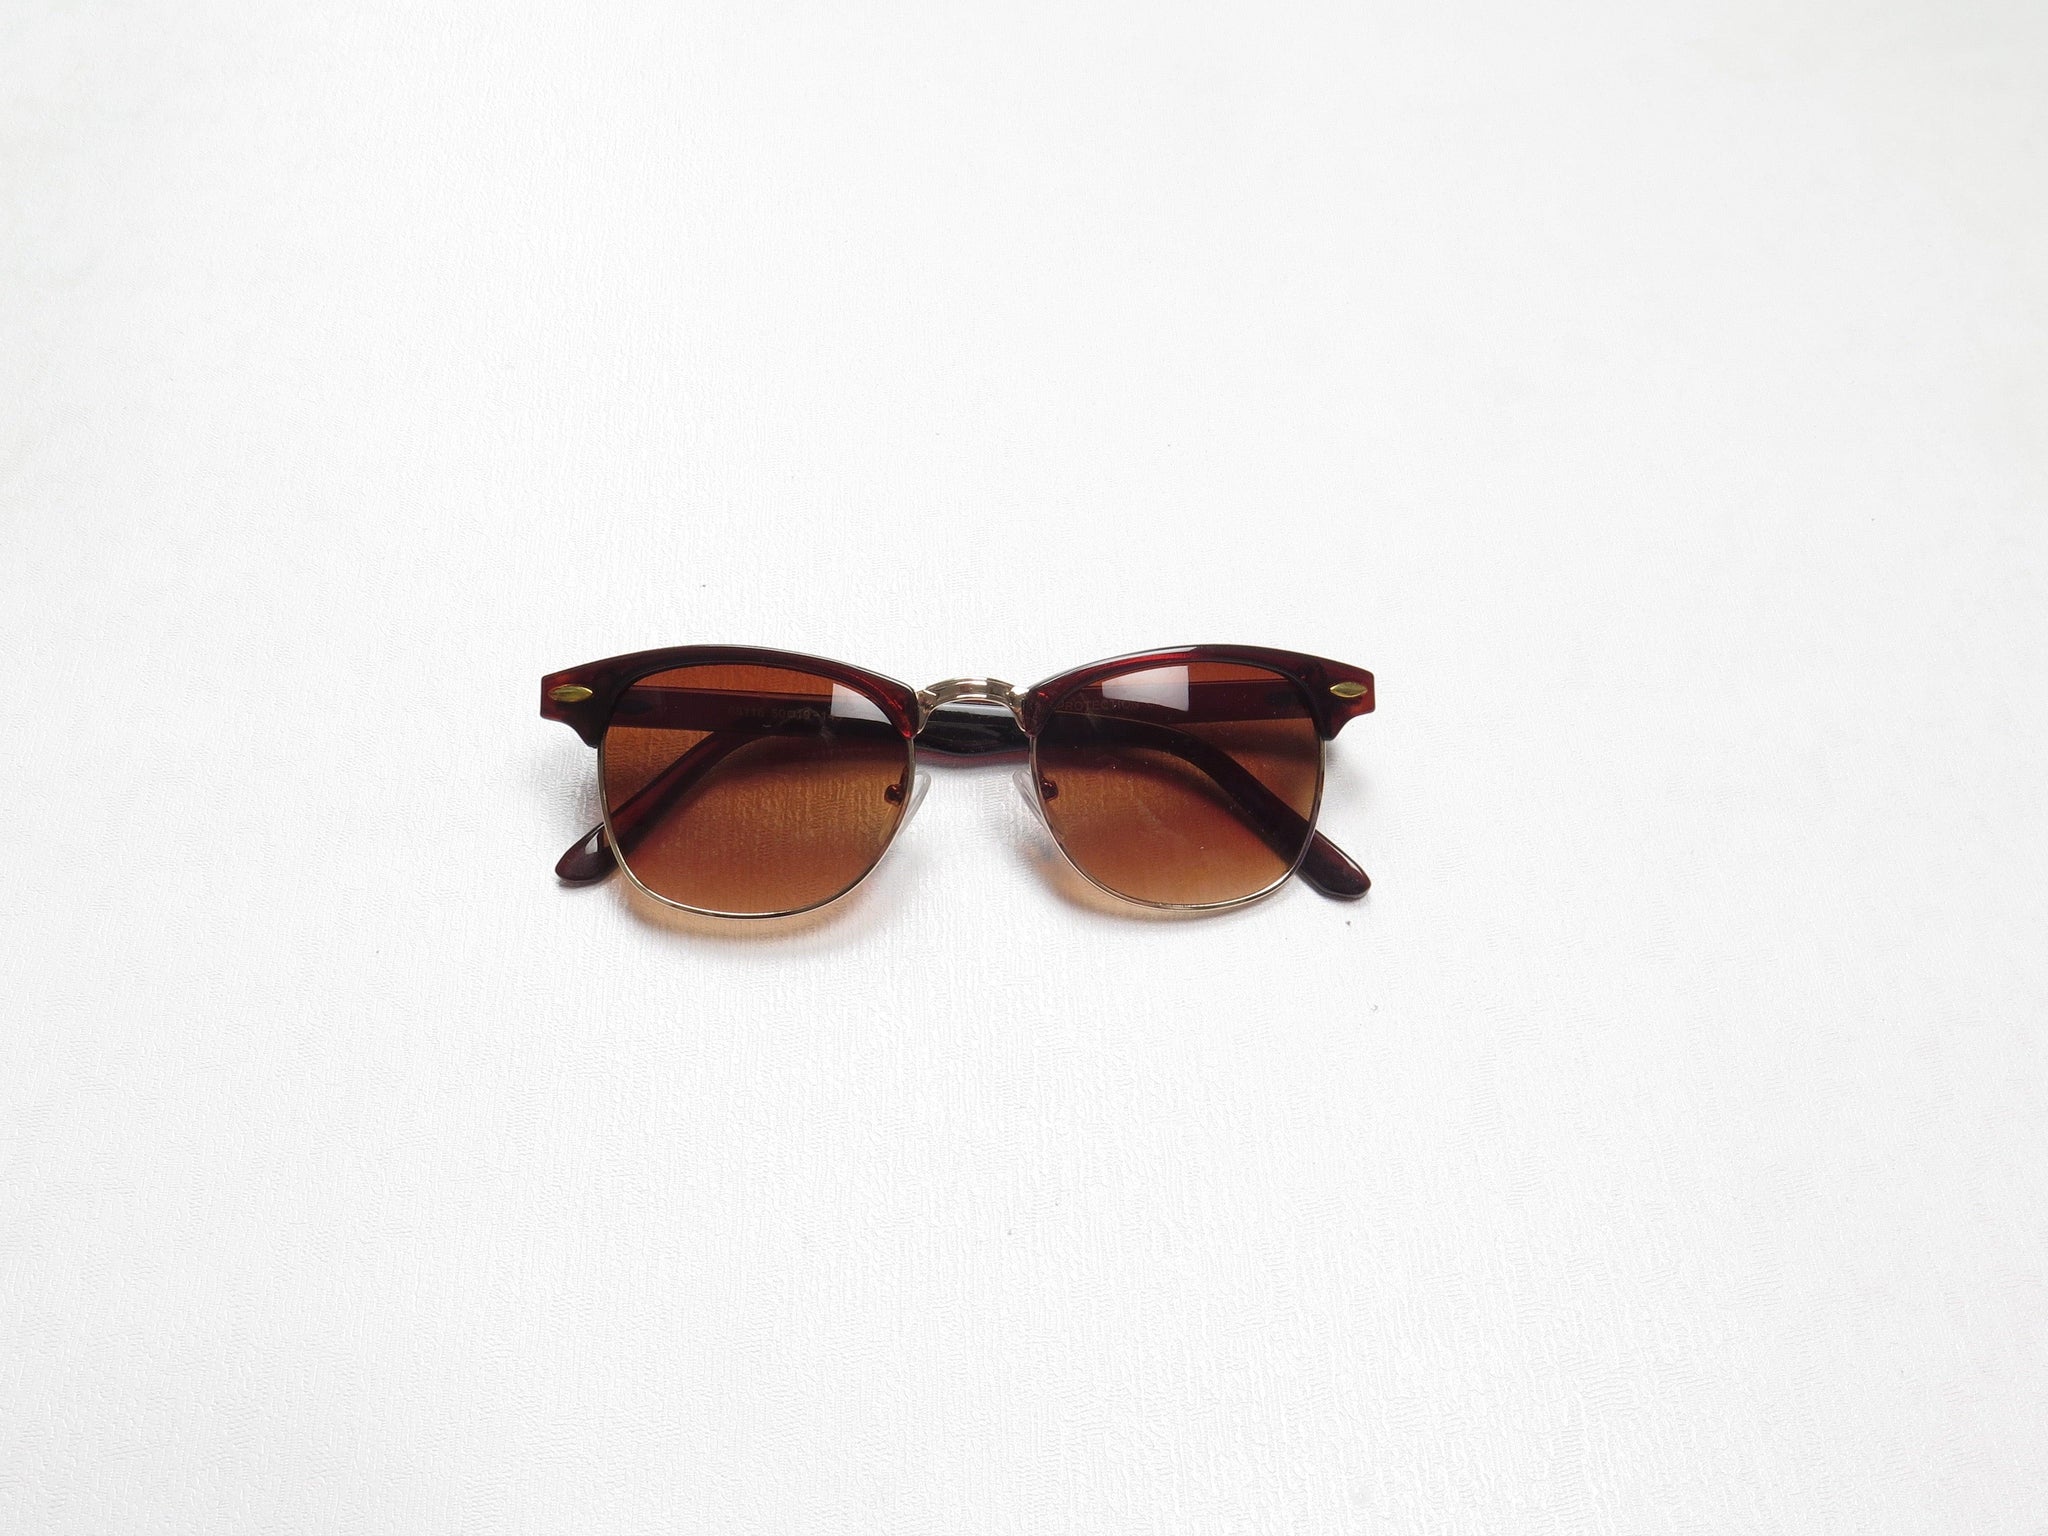 Club-master Style Sunglasses Black & Brown - The Harlequin